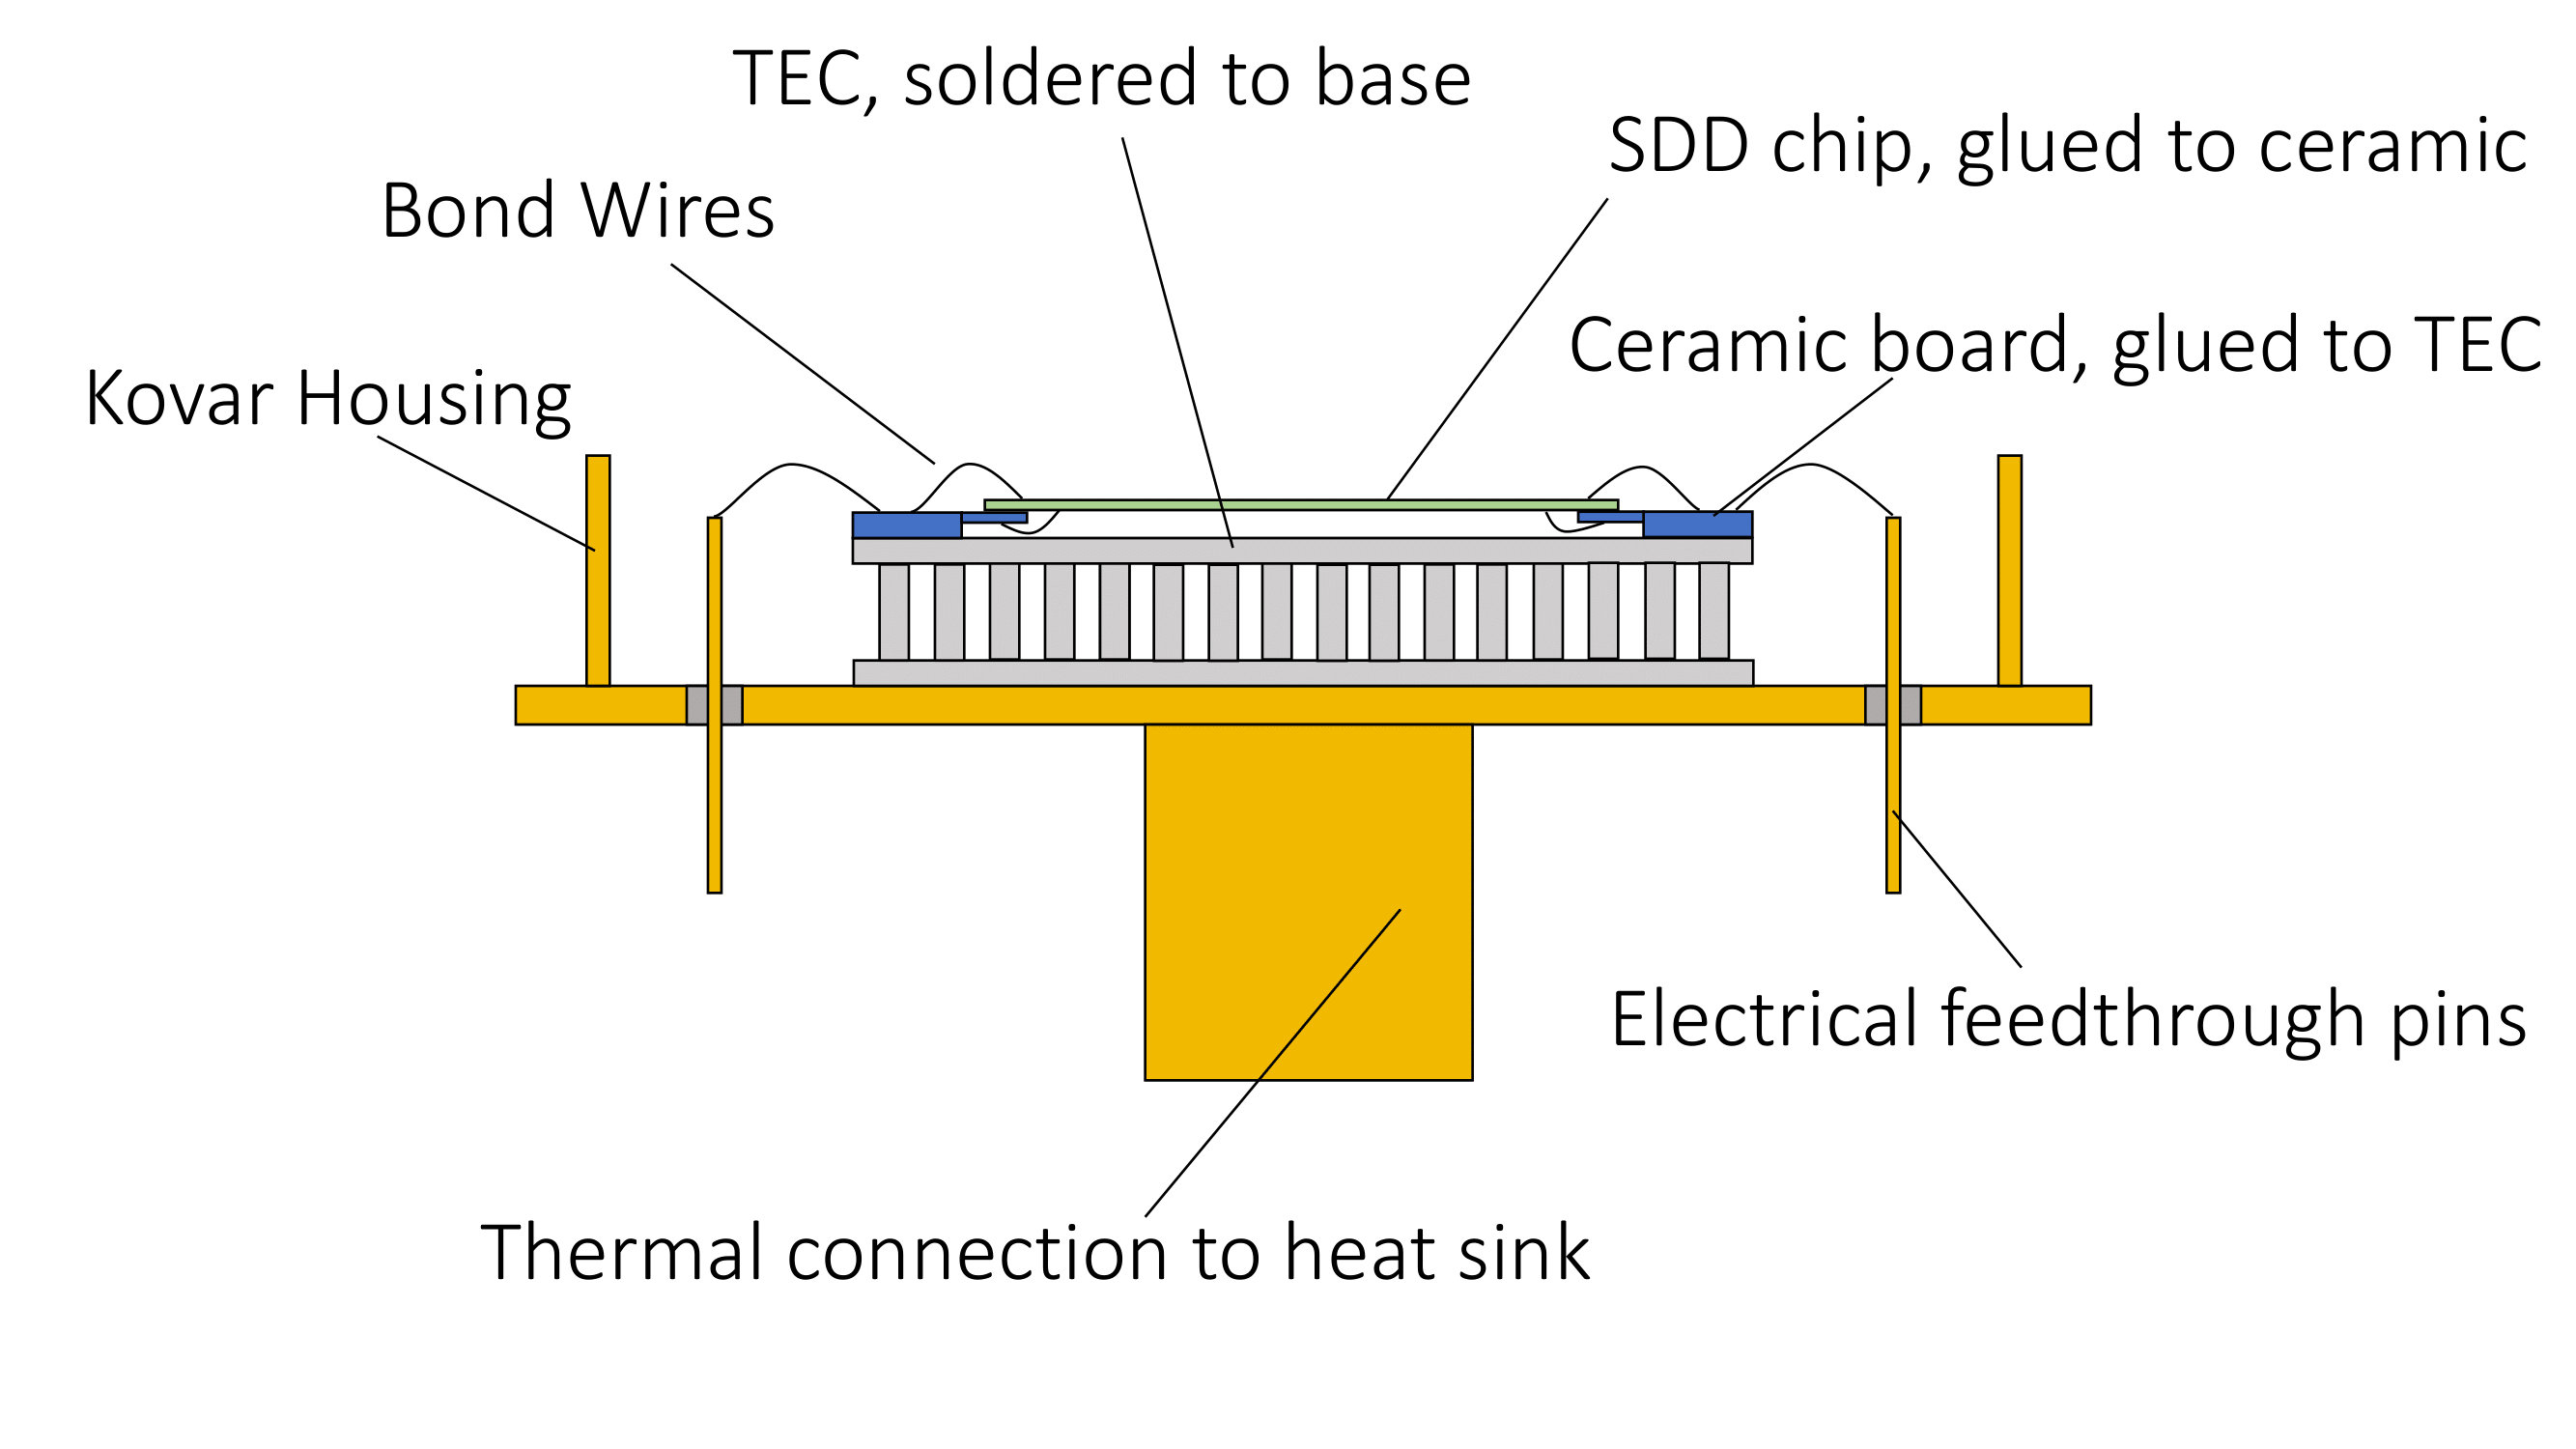 The bottom image (labelled '(b)') is a schematic side-view of the above pictured SDD. A yellow platform with vertical pins is on a rod and holds a series of metallic pins with a blue line across the top and a white layer in the centre of the blue line. The yellow rod at the bottom is labelled 'Thermal connection to heat sink', the yellow platform it is connected to is labelled 'Kovar housing' with the yellow pins above and below the platform labelled 'Electrical feedthrough pins', the metallic pins are labelled 'TEC, soldered to base', the blue line is labelled 'Ceramic board, glued to TEC', and the white centre of the blue line is labelled 'SDD chip, glued to ceramic'. Thin, curved black lines connect the top of the electrical feedthrough pins to the ceramic board and SDD and are labelled 'Bond wires'.